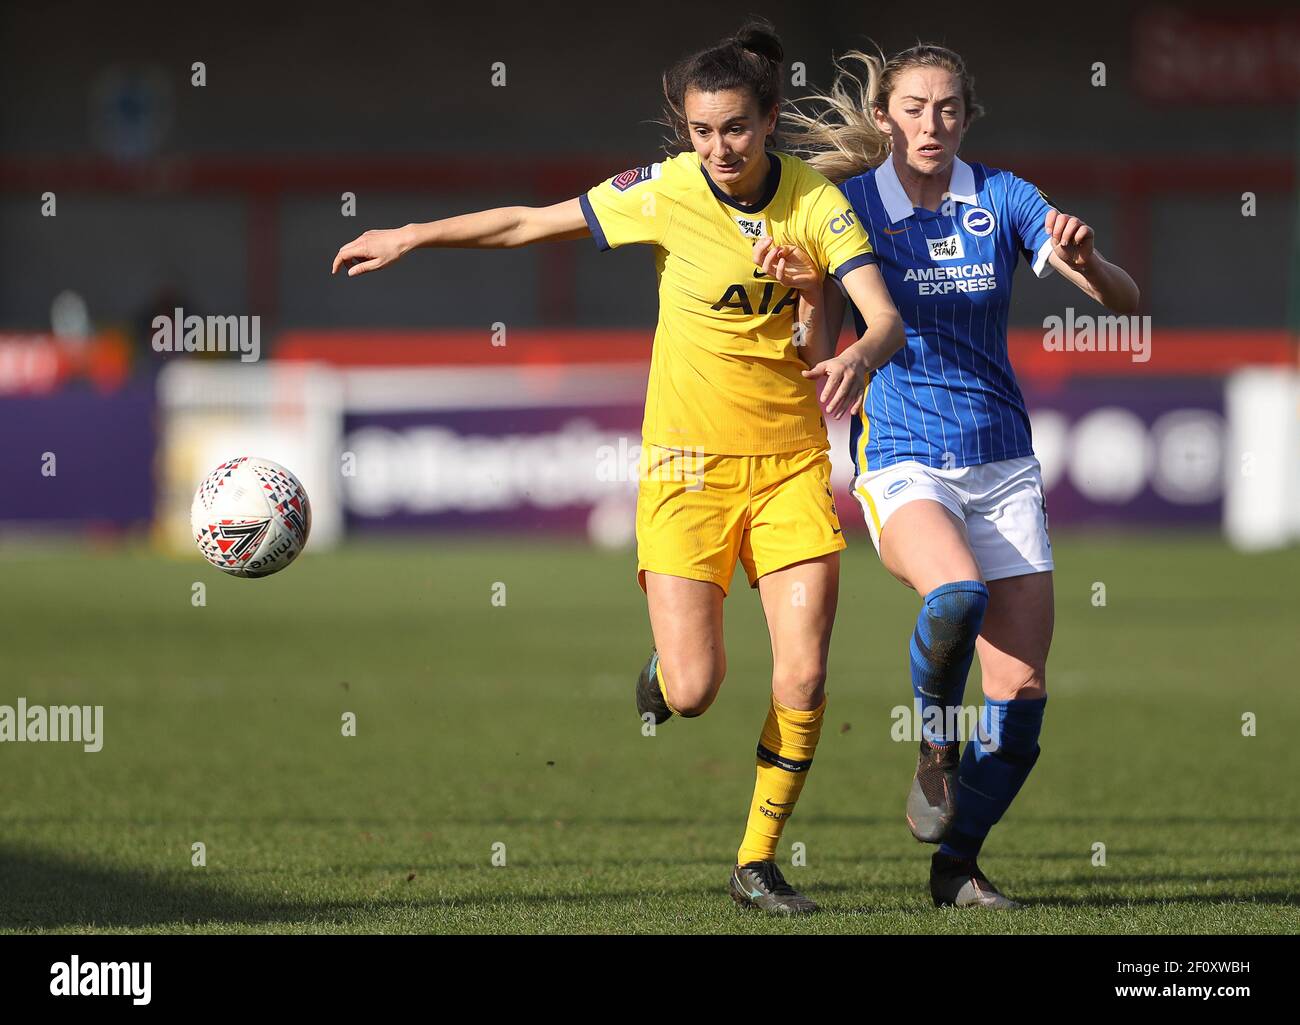 Crawley, UK. 7th March 2021.Rosella Ayane of Tottenham  is challenged by Megan Connolly of Brighton during the FA Women's Super League match between Brighton & Hove Albion Women and Tottenham Hotspur Women at The People's Pension Stadium on March 7th 2021 in Crawley, United Kingdom Stock Photo